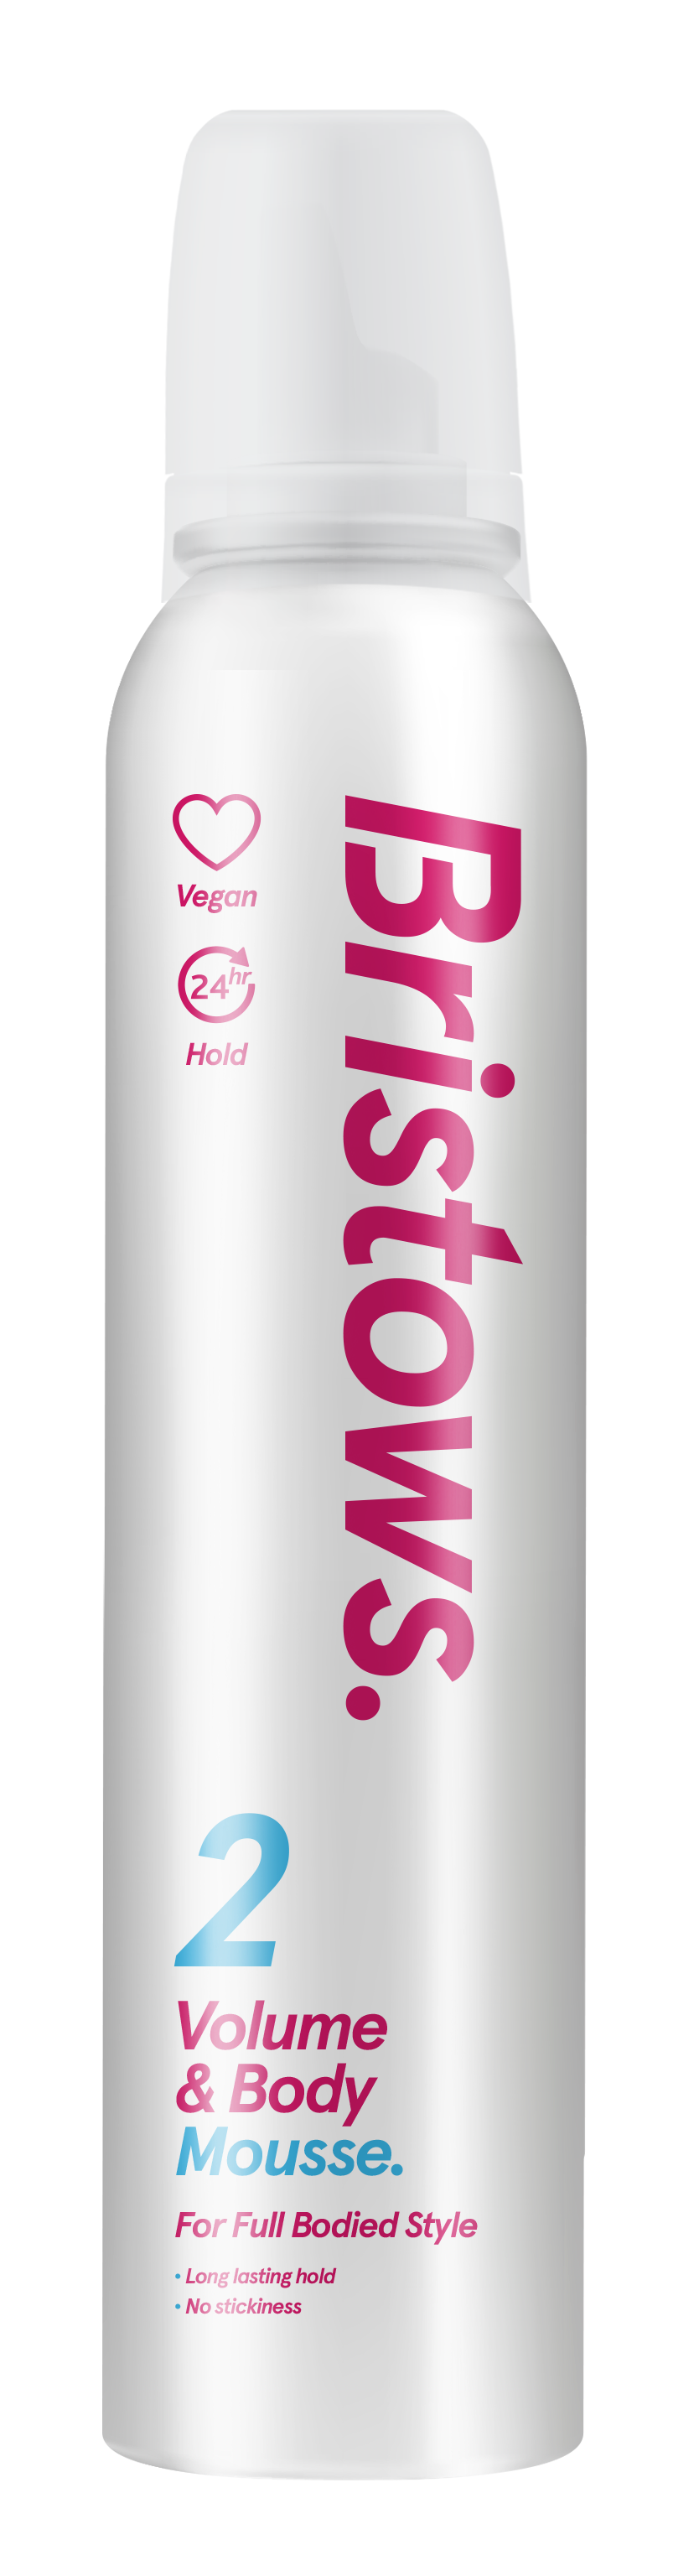 bristows body and volume mousse